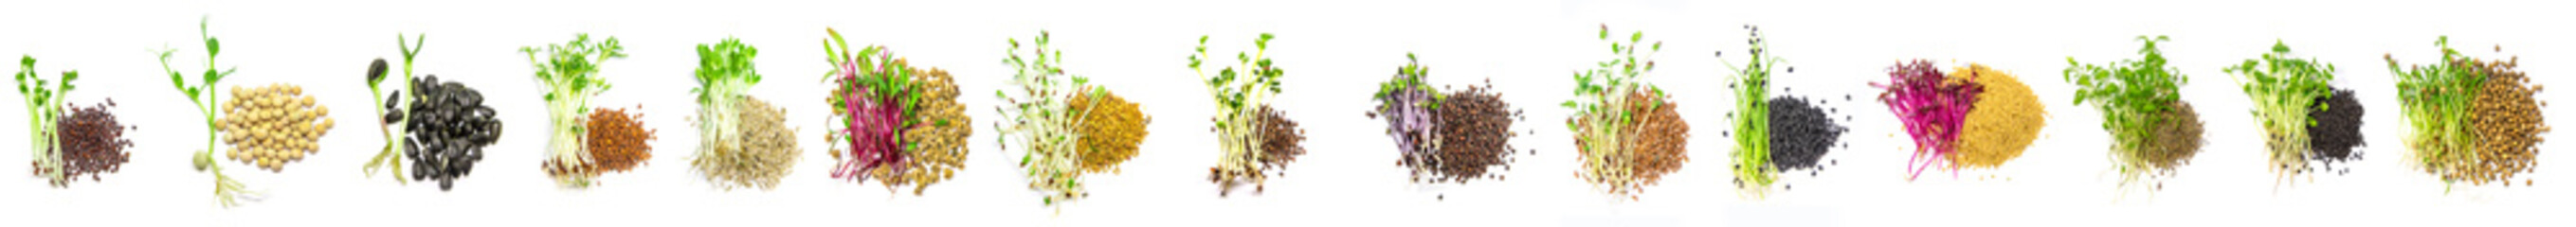 Collage of different microgreens on a white background. Selective focus.